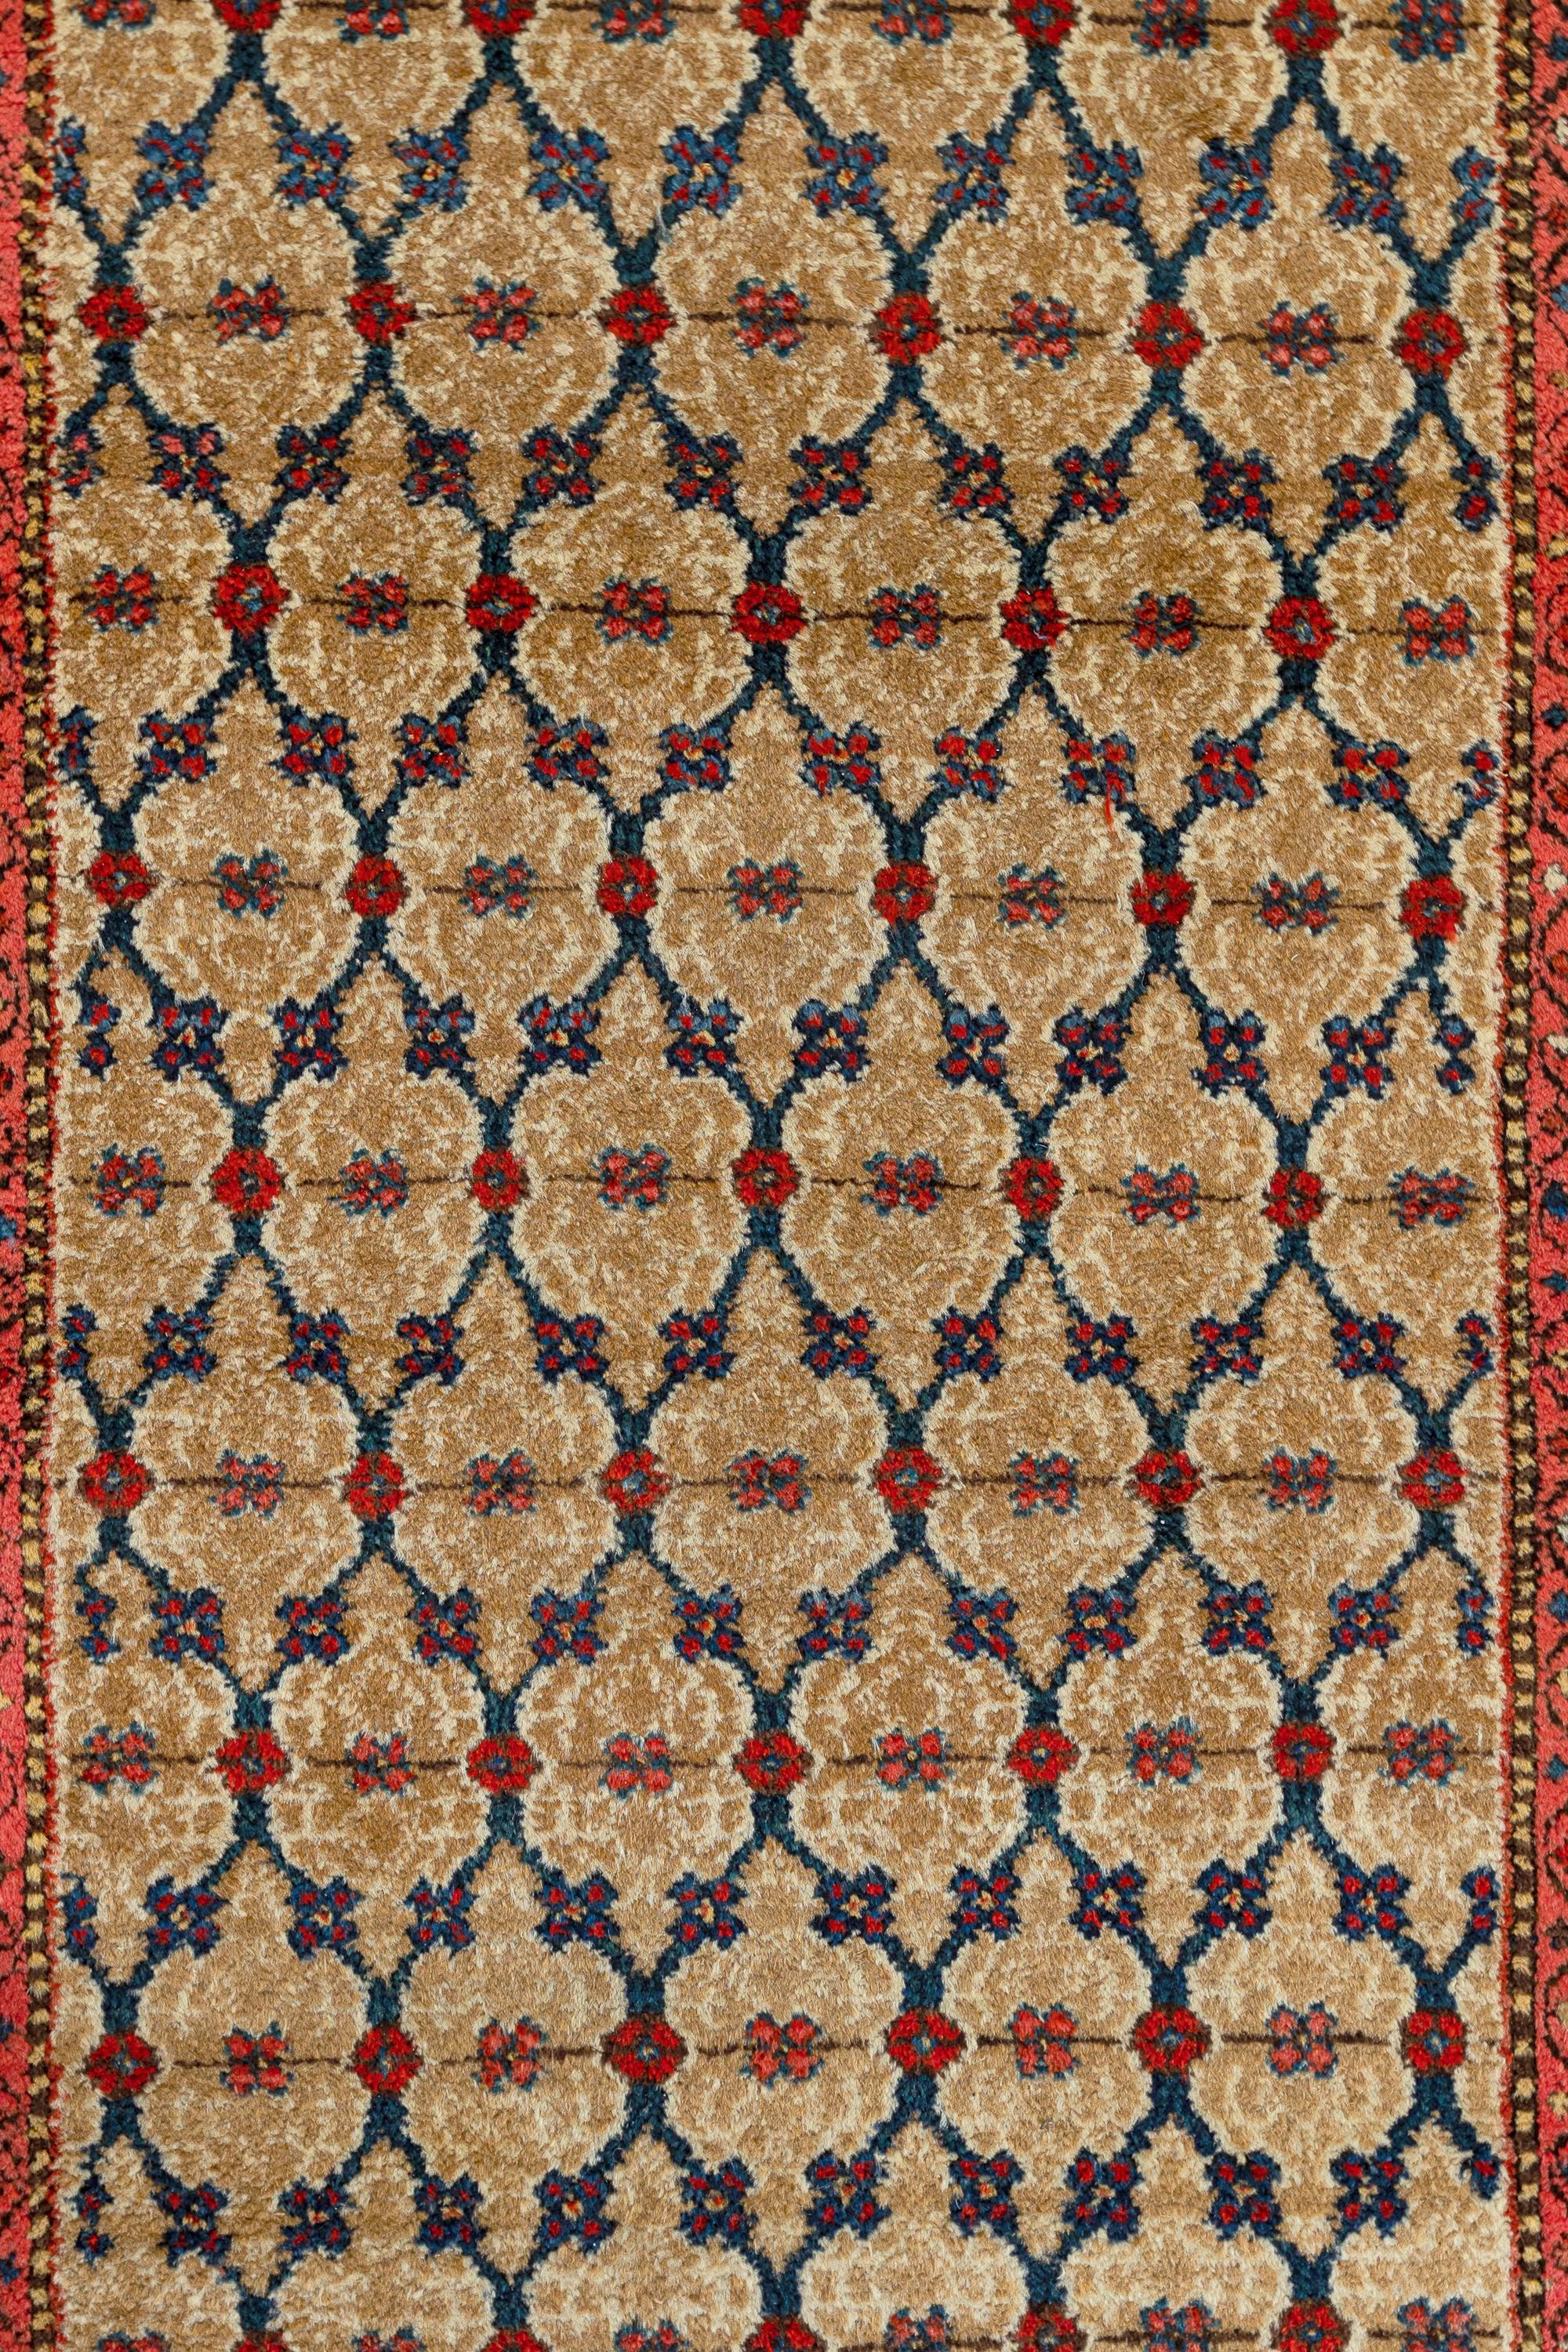 Malayer – Northwest Persia

Antique Persian Malayer rug, handwoven between the 1900s and 1920s. Numerous lozenges are connected by flowers that contrast with the Malayer’s sandy background, creating an appearance reminiscent of stained glass